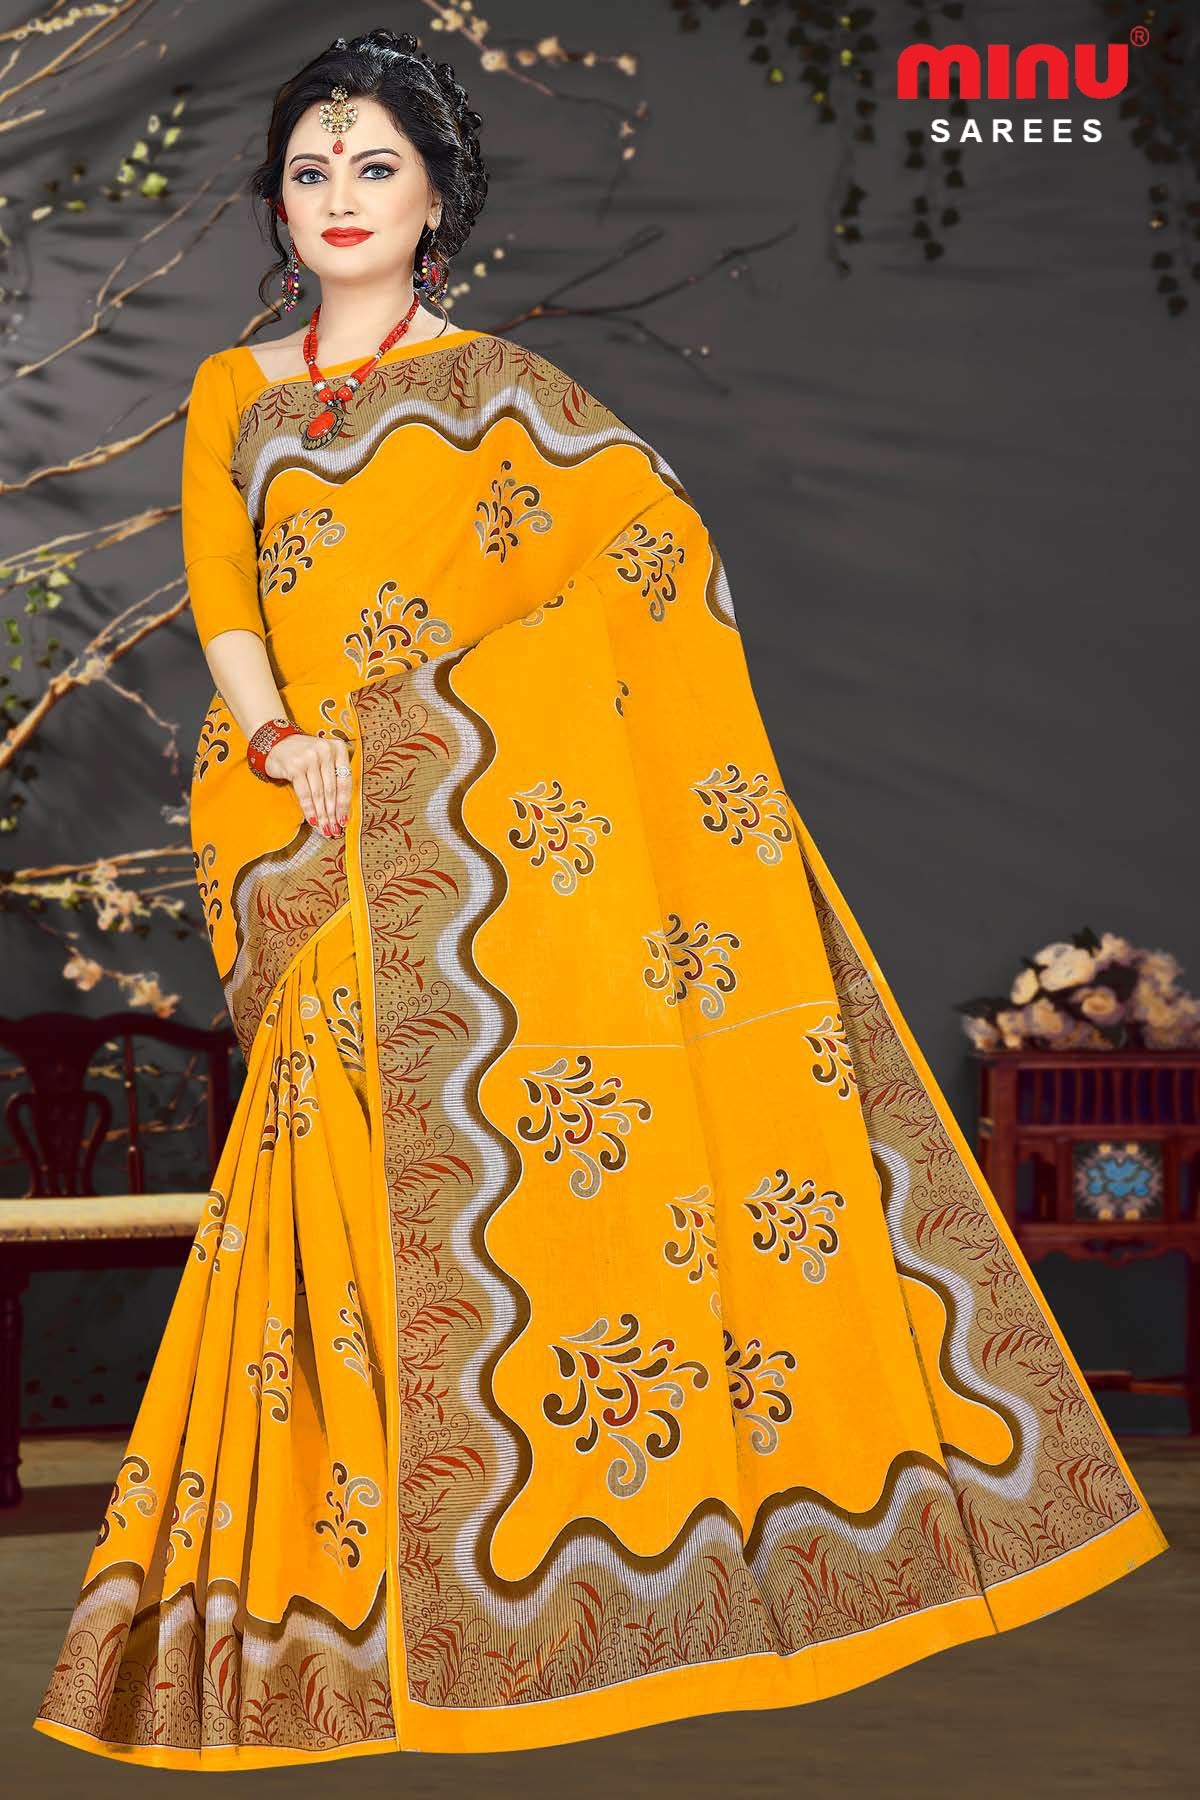 Women standing in bold yellow color printed saree image